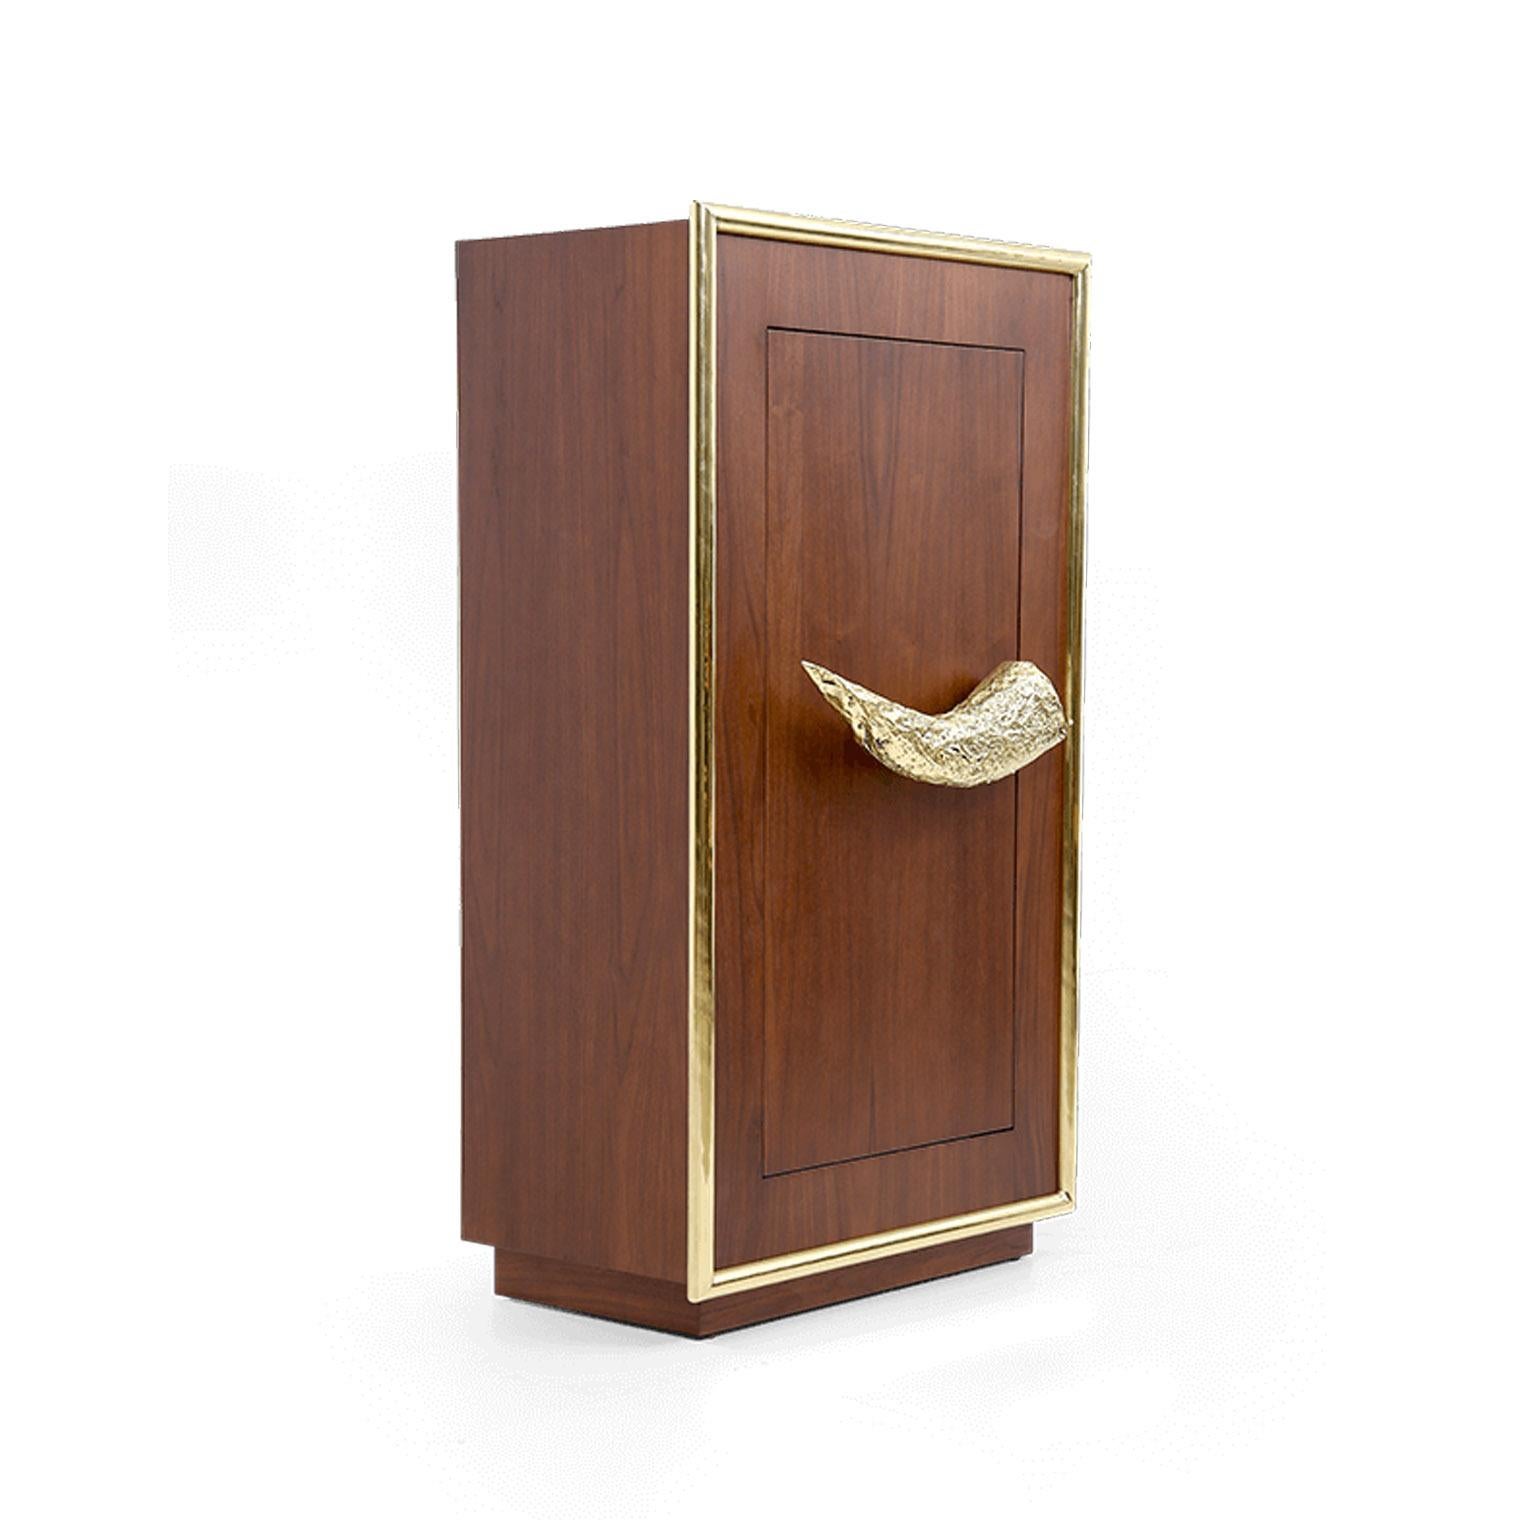 This piece is a sample from our showroom with almost invisible signs of use and it is available for immediate purchase with a great discount. 

Perfect for entertaining at home, the Buffalo drink cabinet has everything you need for your dinner or